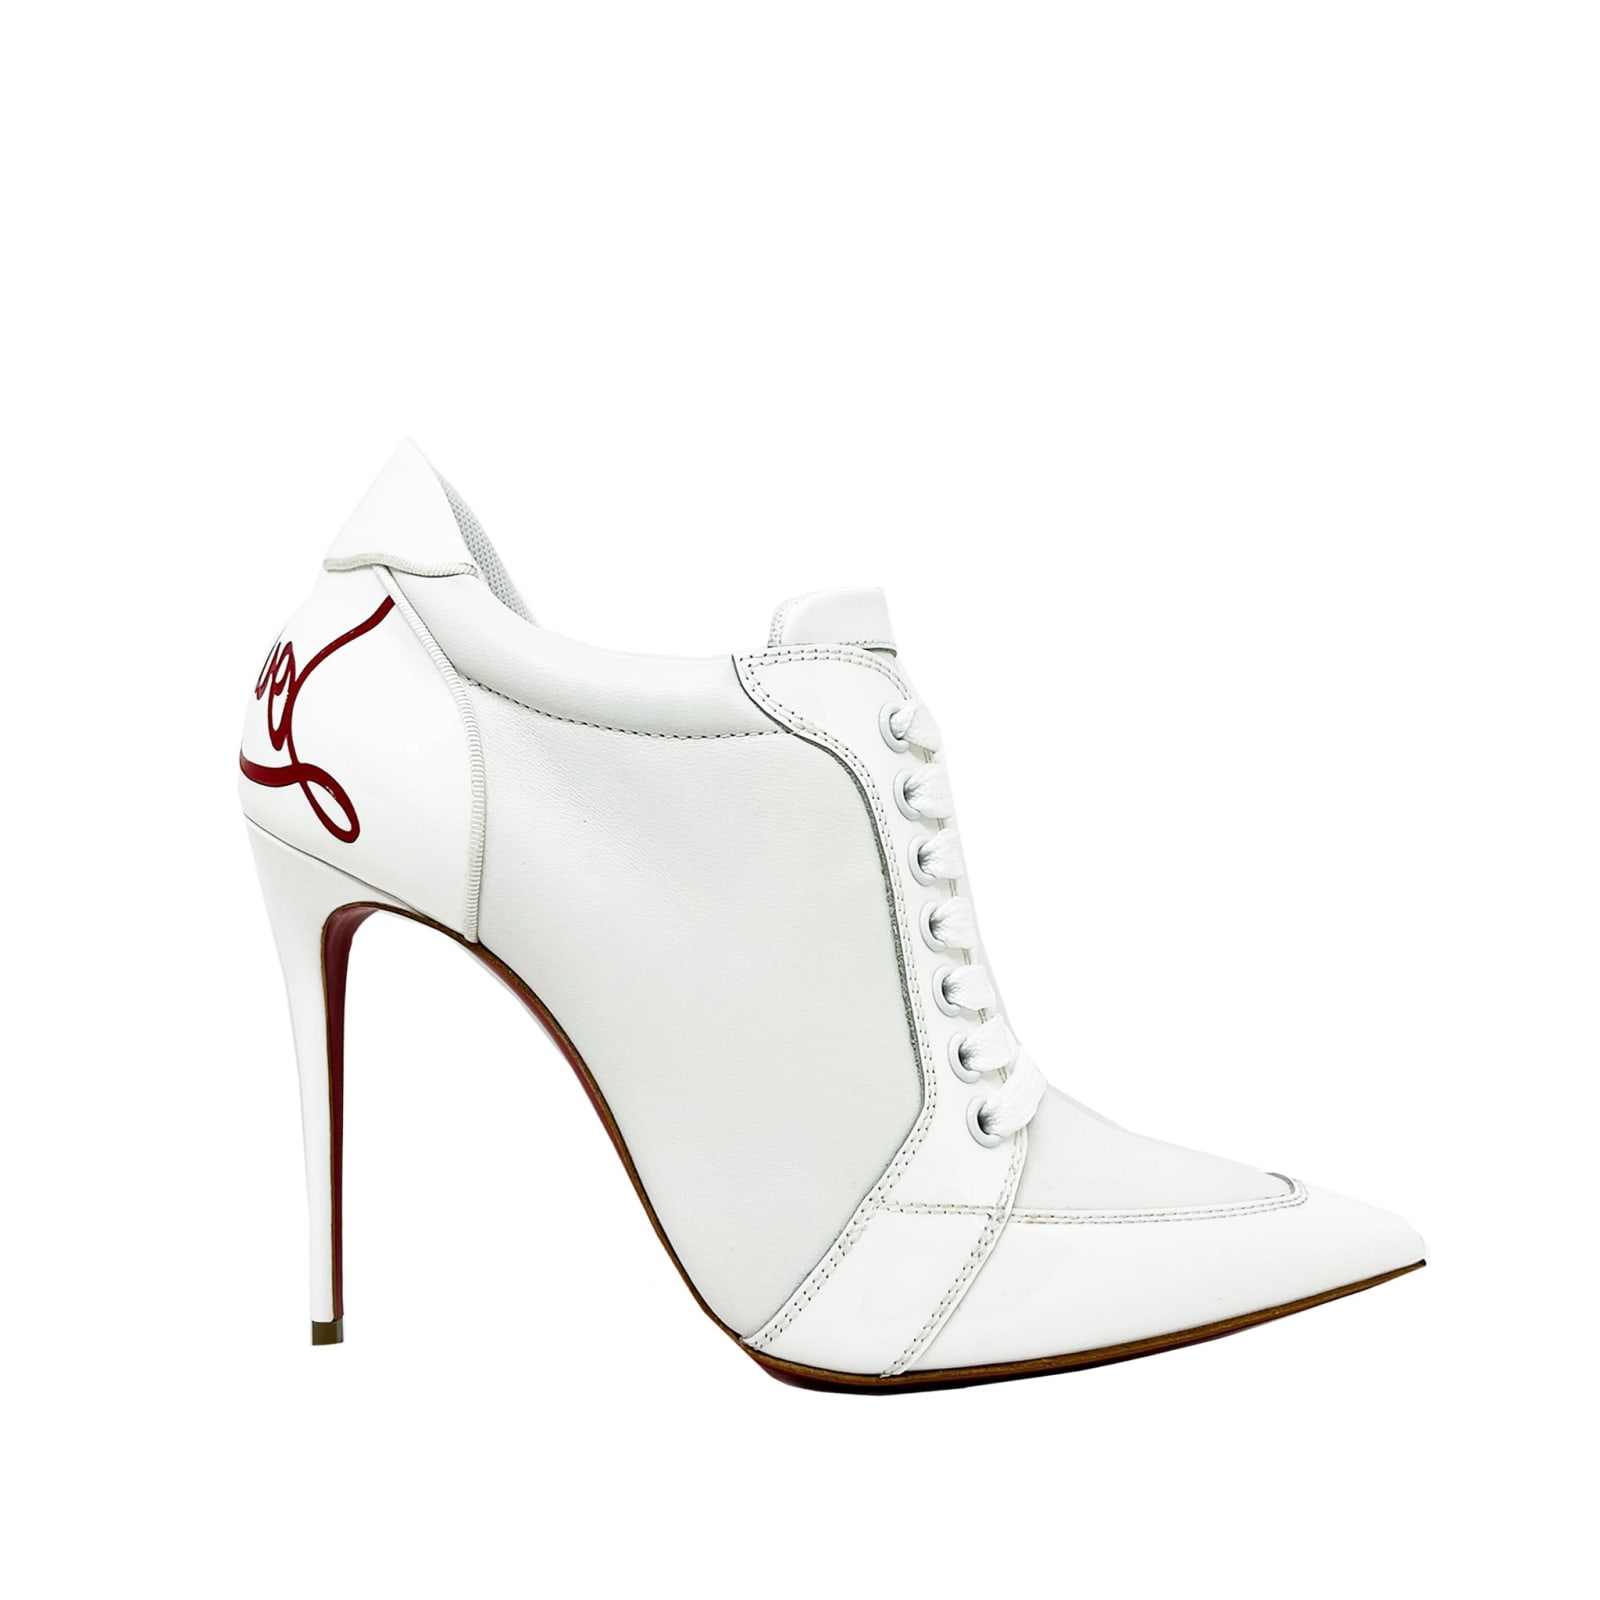 Christian Louboutin Leather Pumps